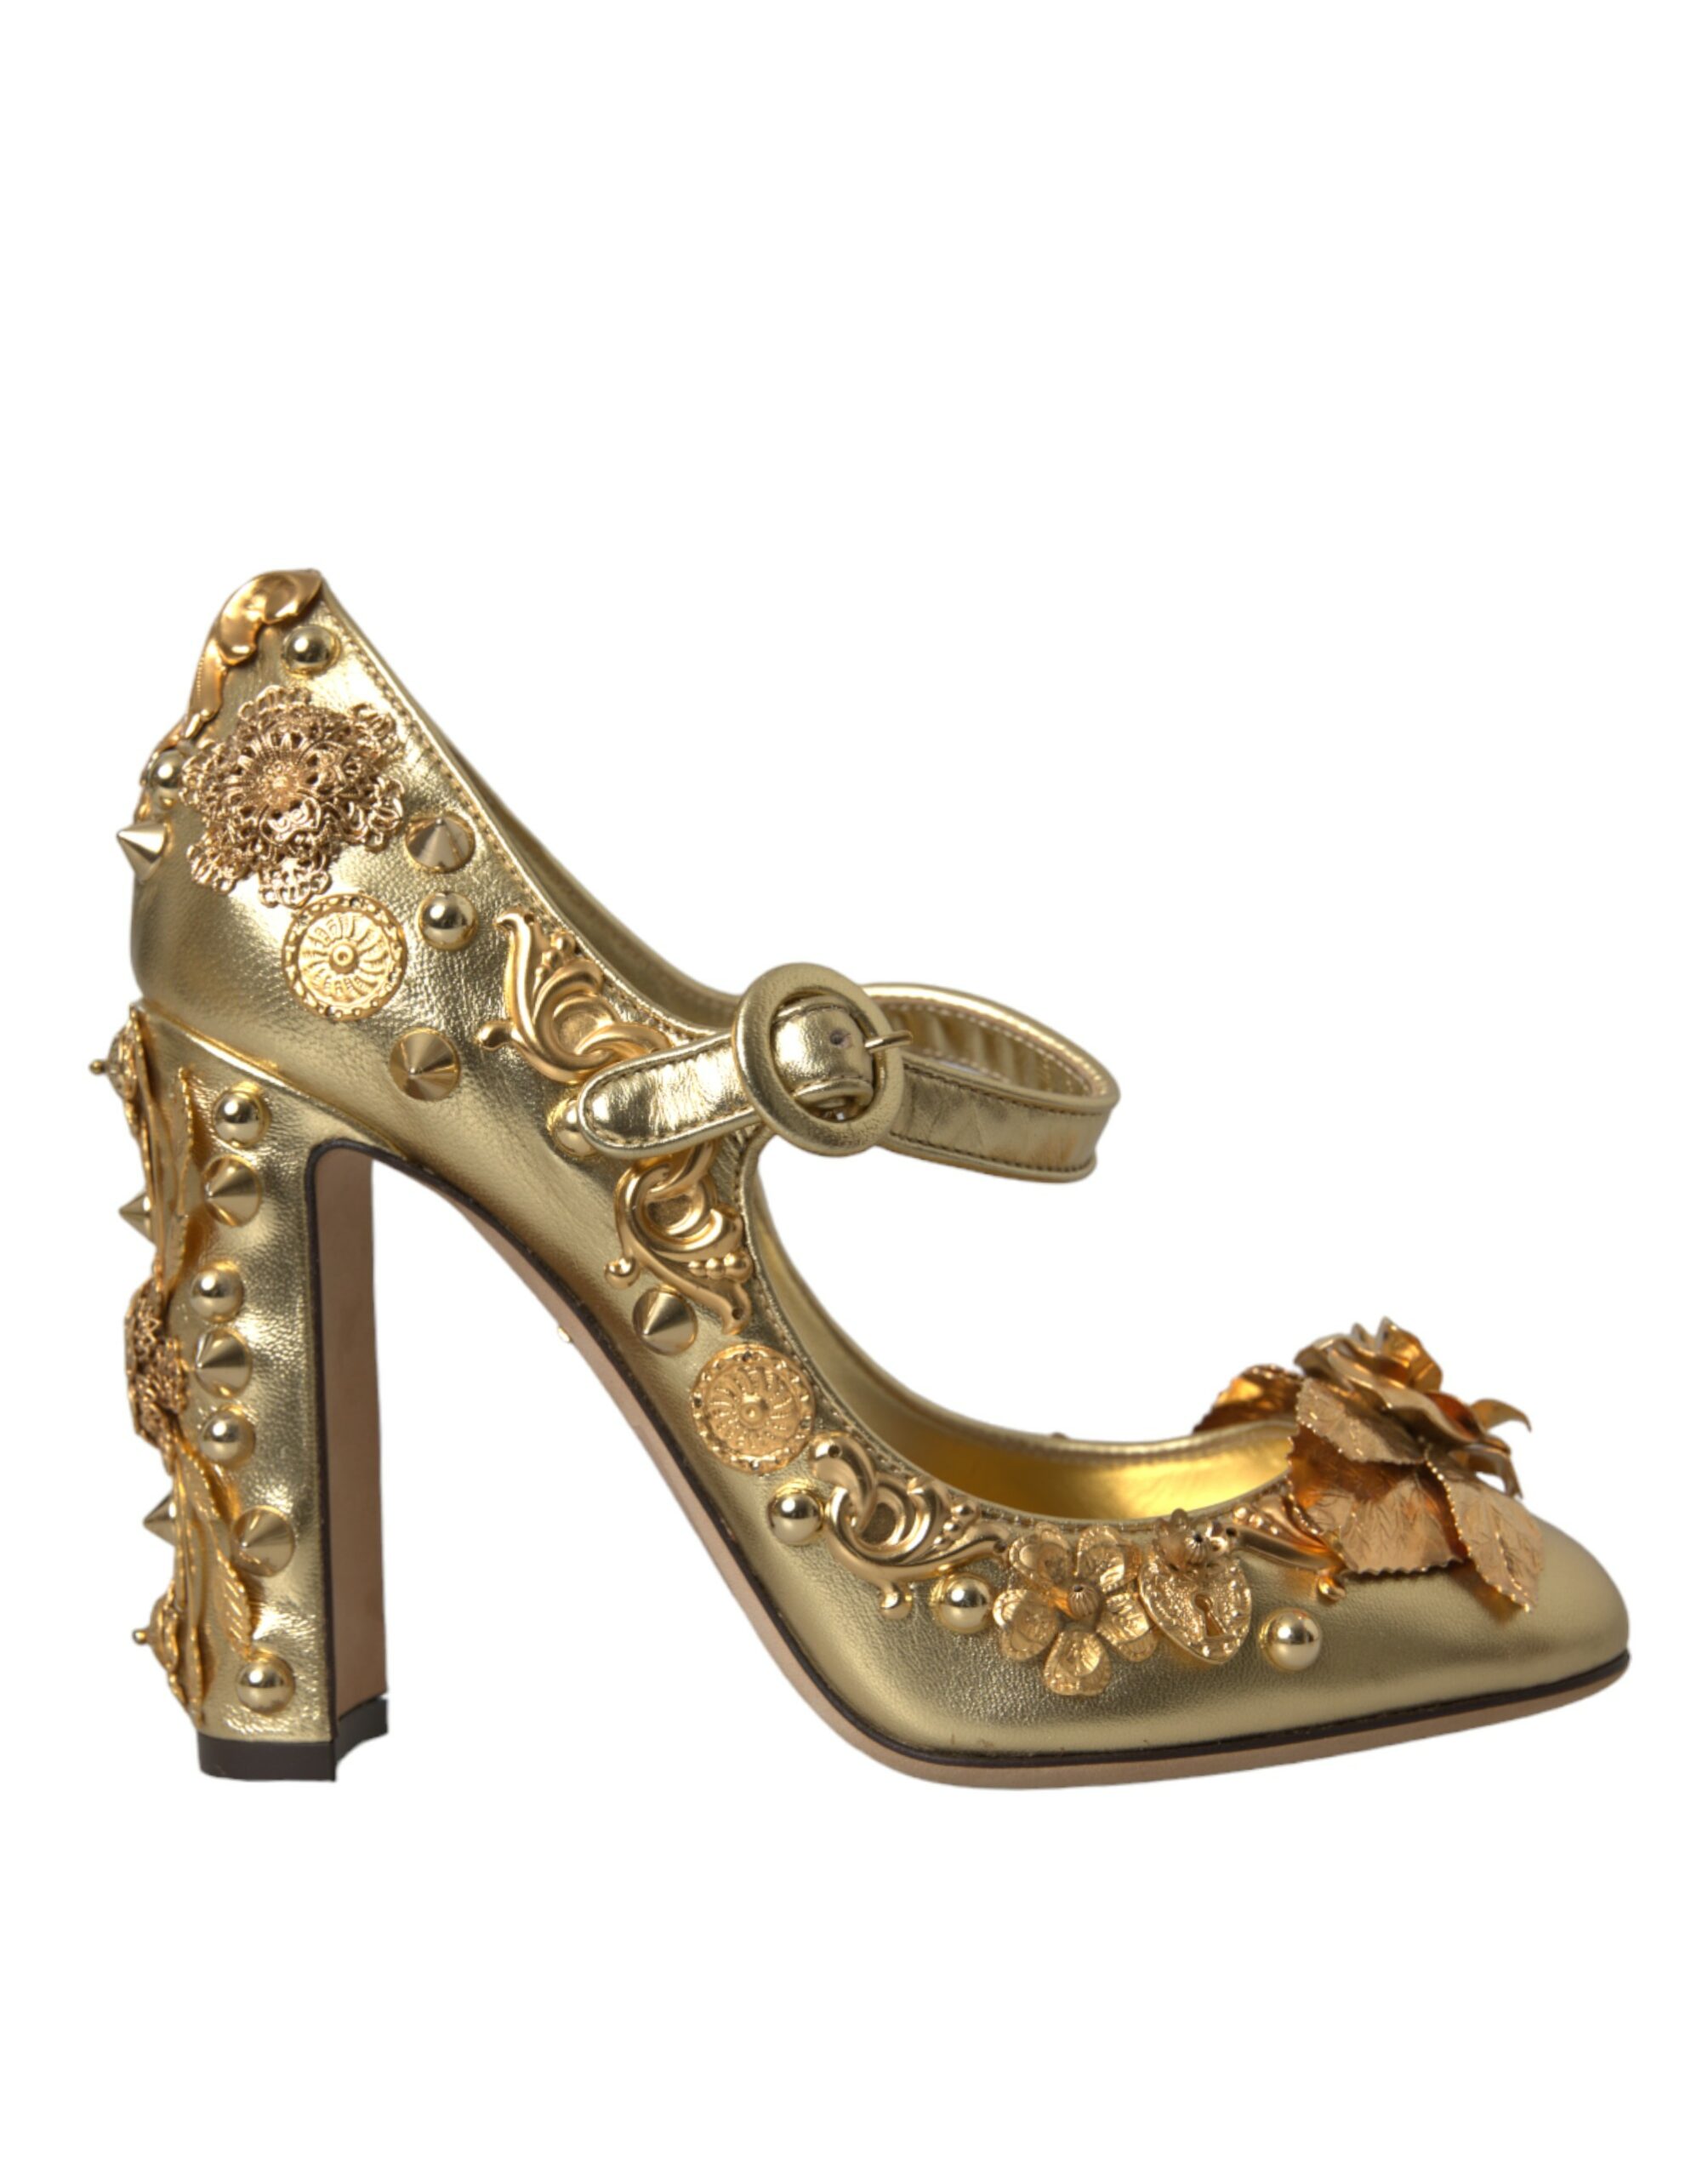 Dolce & Gabbana Gold Leather Crystal Mary Janes Pumps Shoes EU36/US5.5 Gold